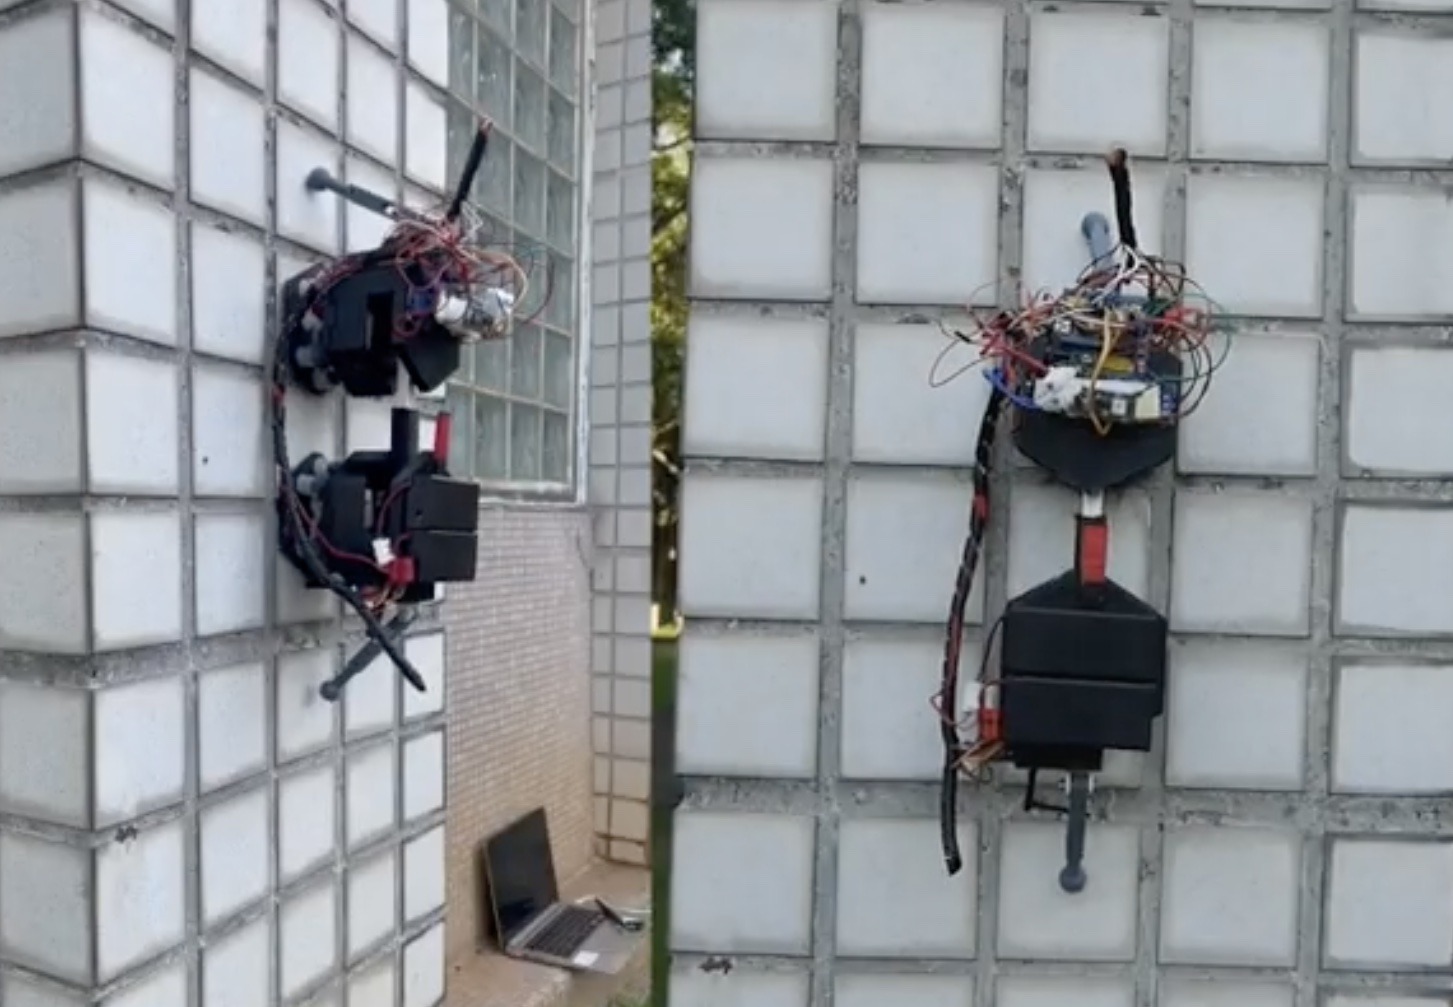 GLEWBOT scales buildings like a gecko to inspect wall tiles